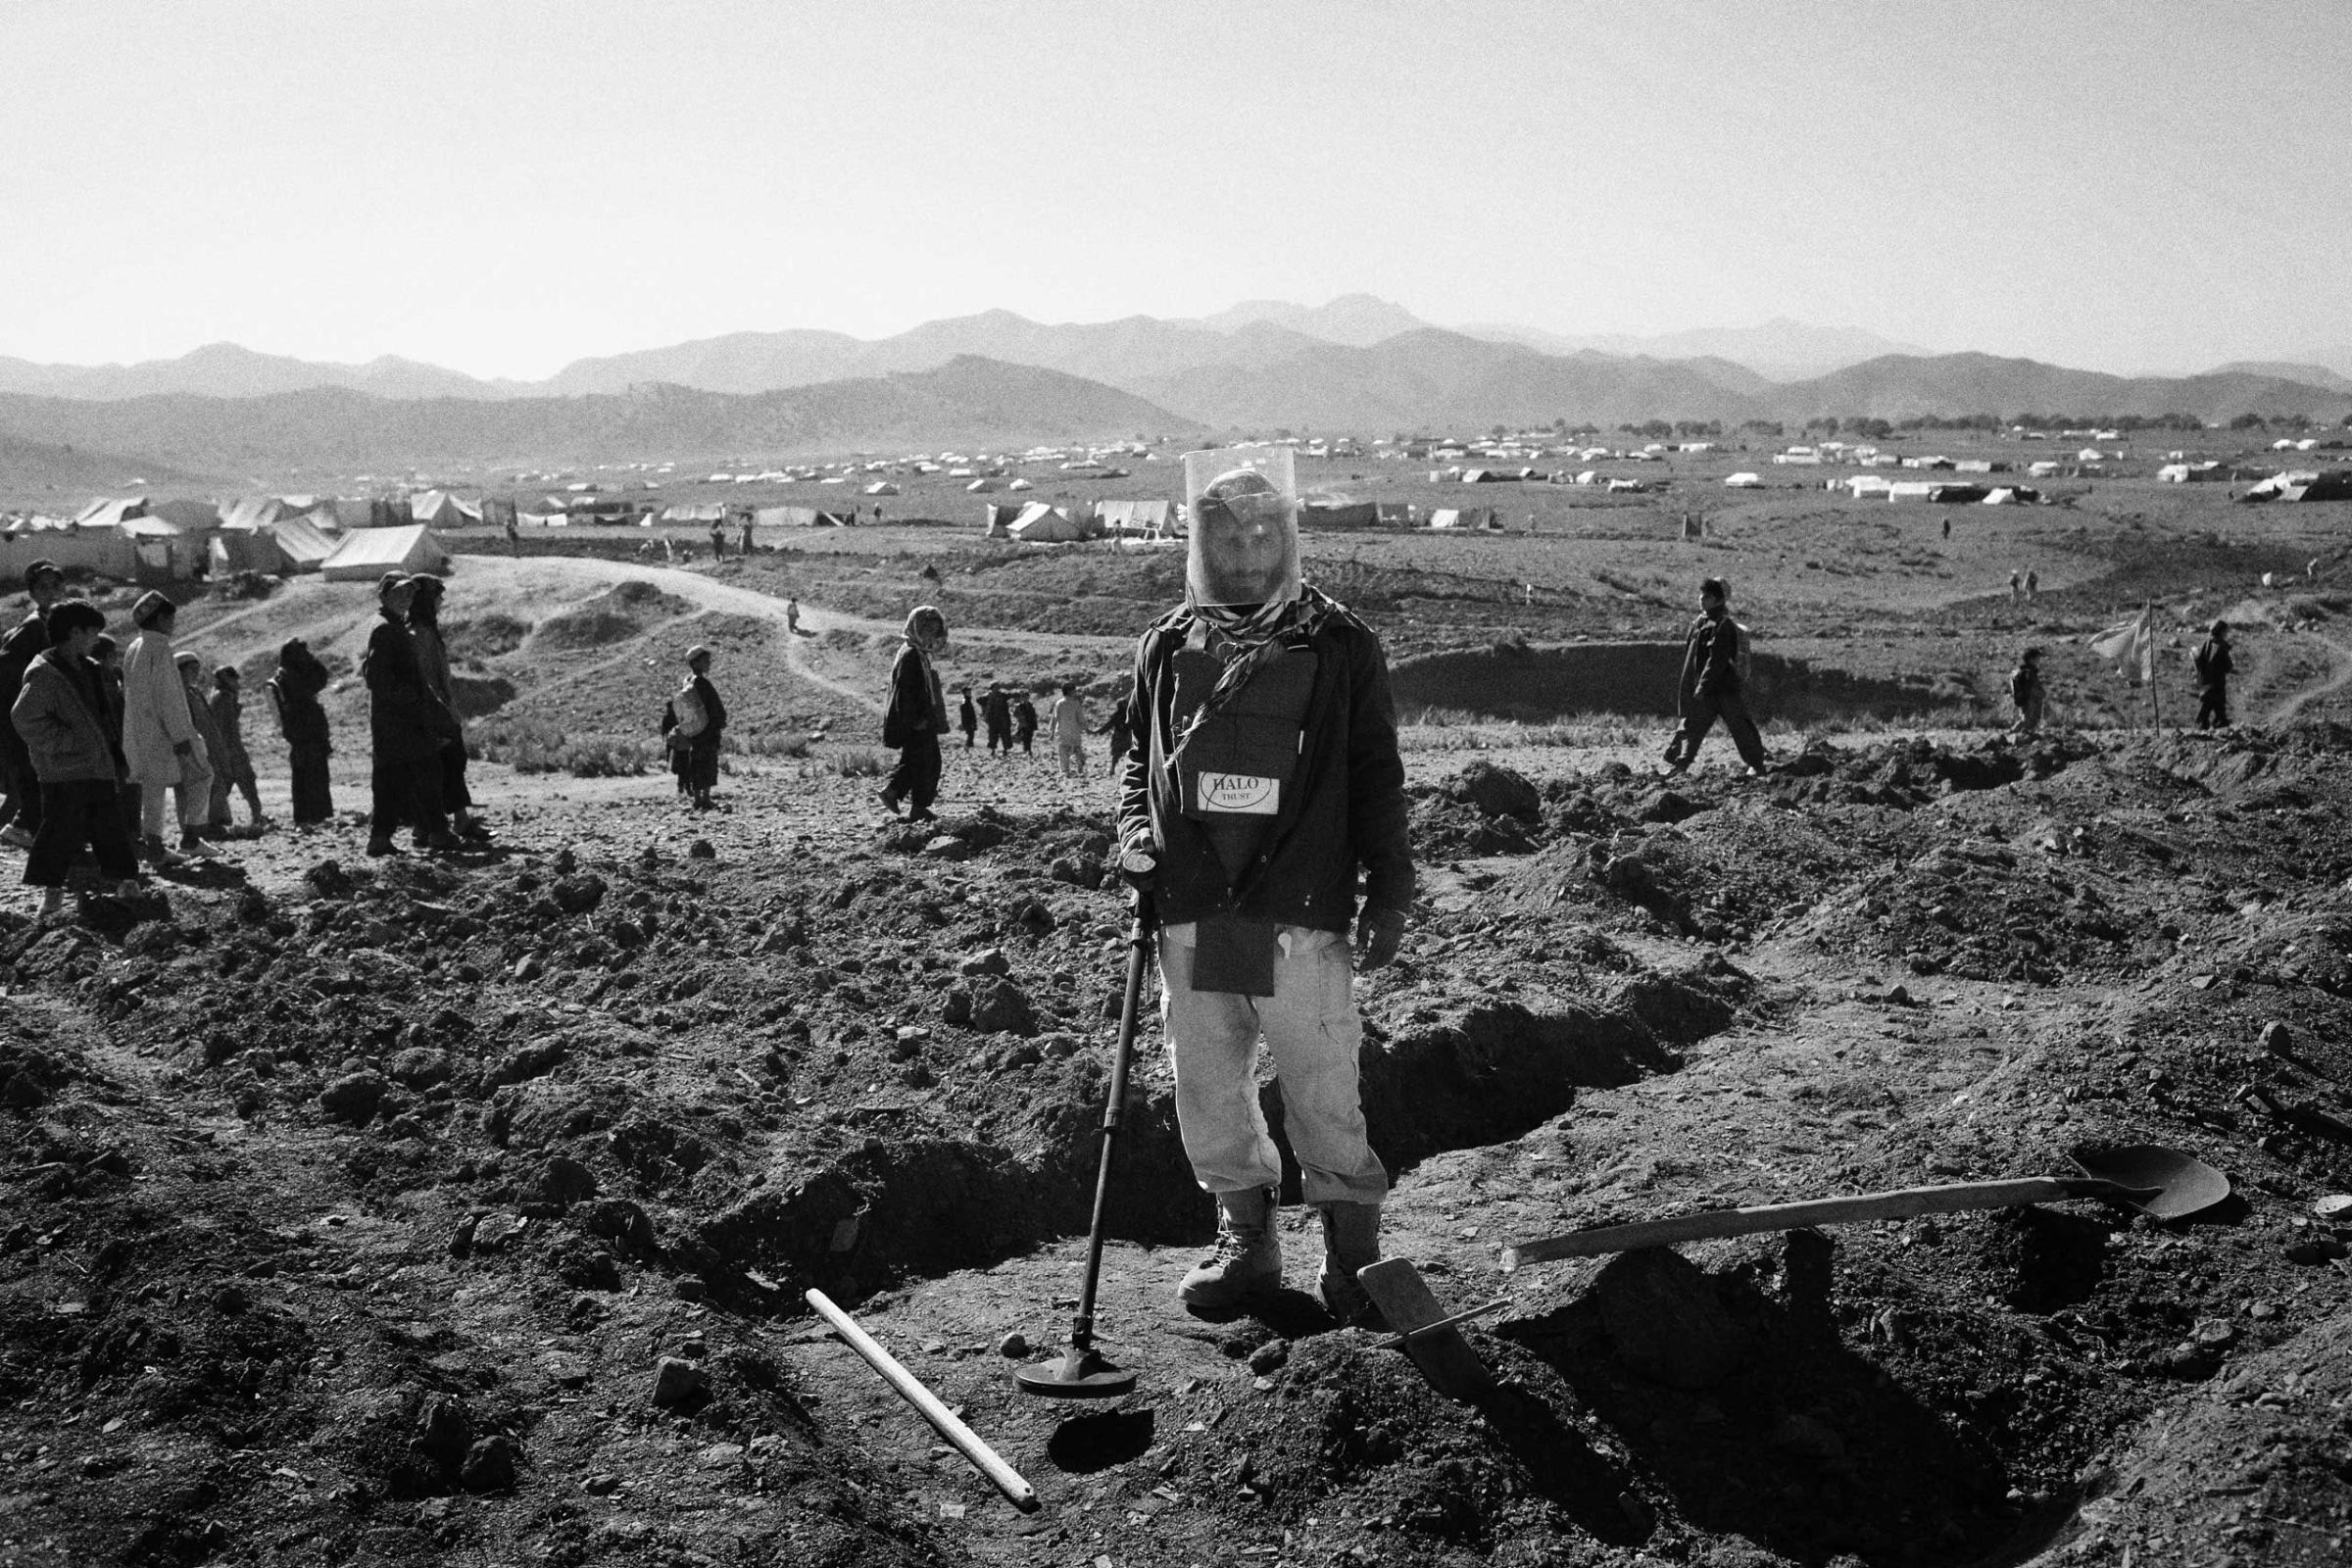 A de-miner from the NGO, Halo Trust works at a site in the Gulan refugee camp in Khost Province, Afghanistan. Halo Trust is one of the organisations responsible for the process which began after anti-tank mines and unexploded ordinance was discovered on the camp site after it was established in June 2014. So far 8 anti-tank mines have been detected and detonated.